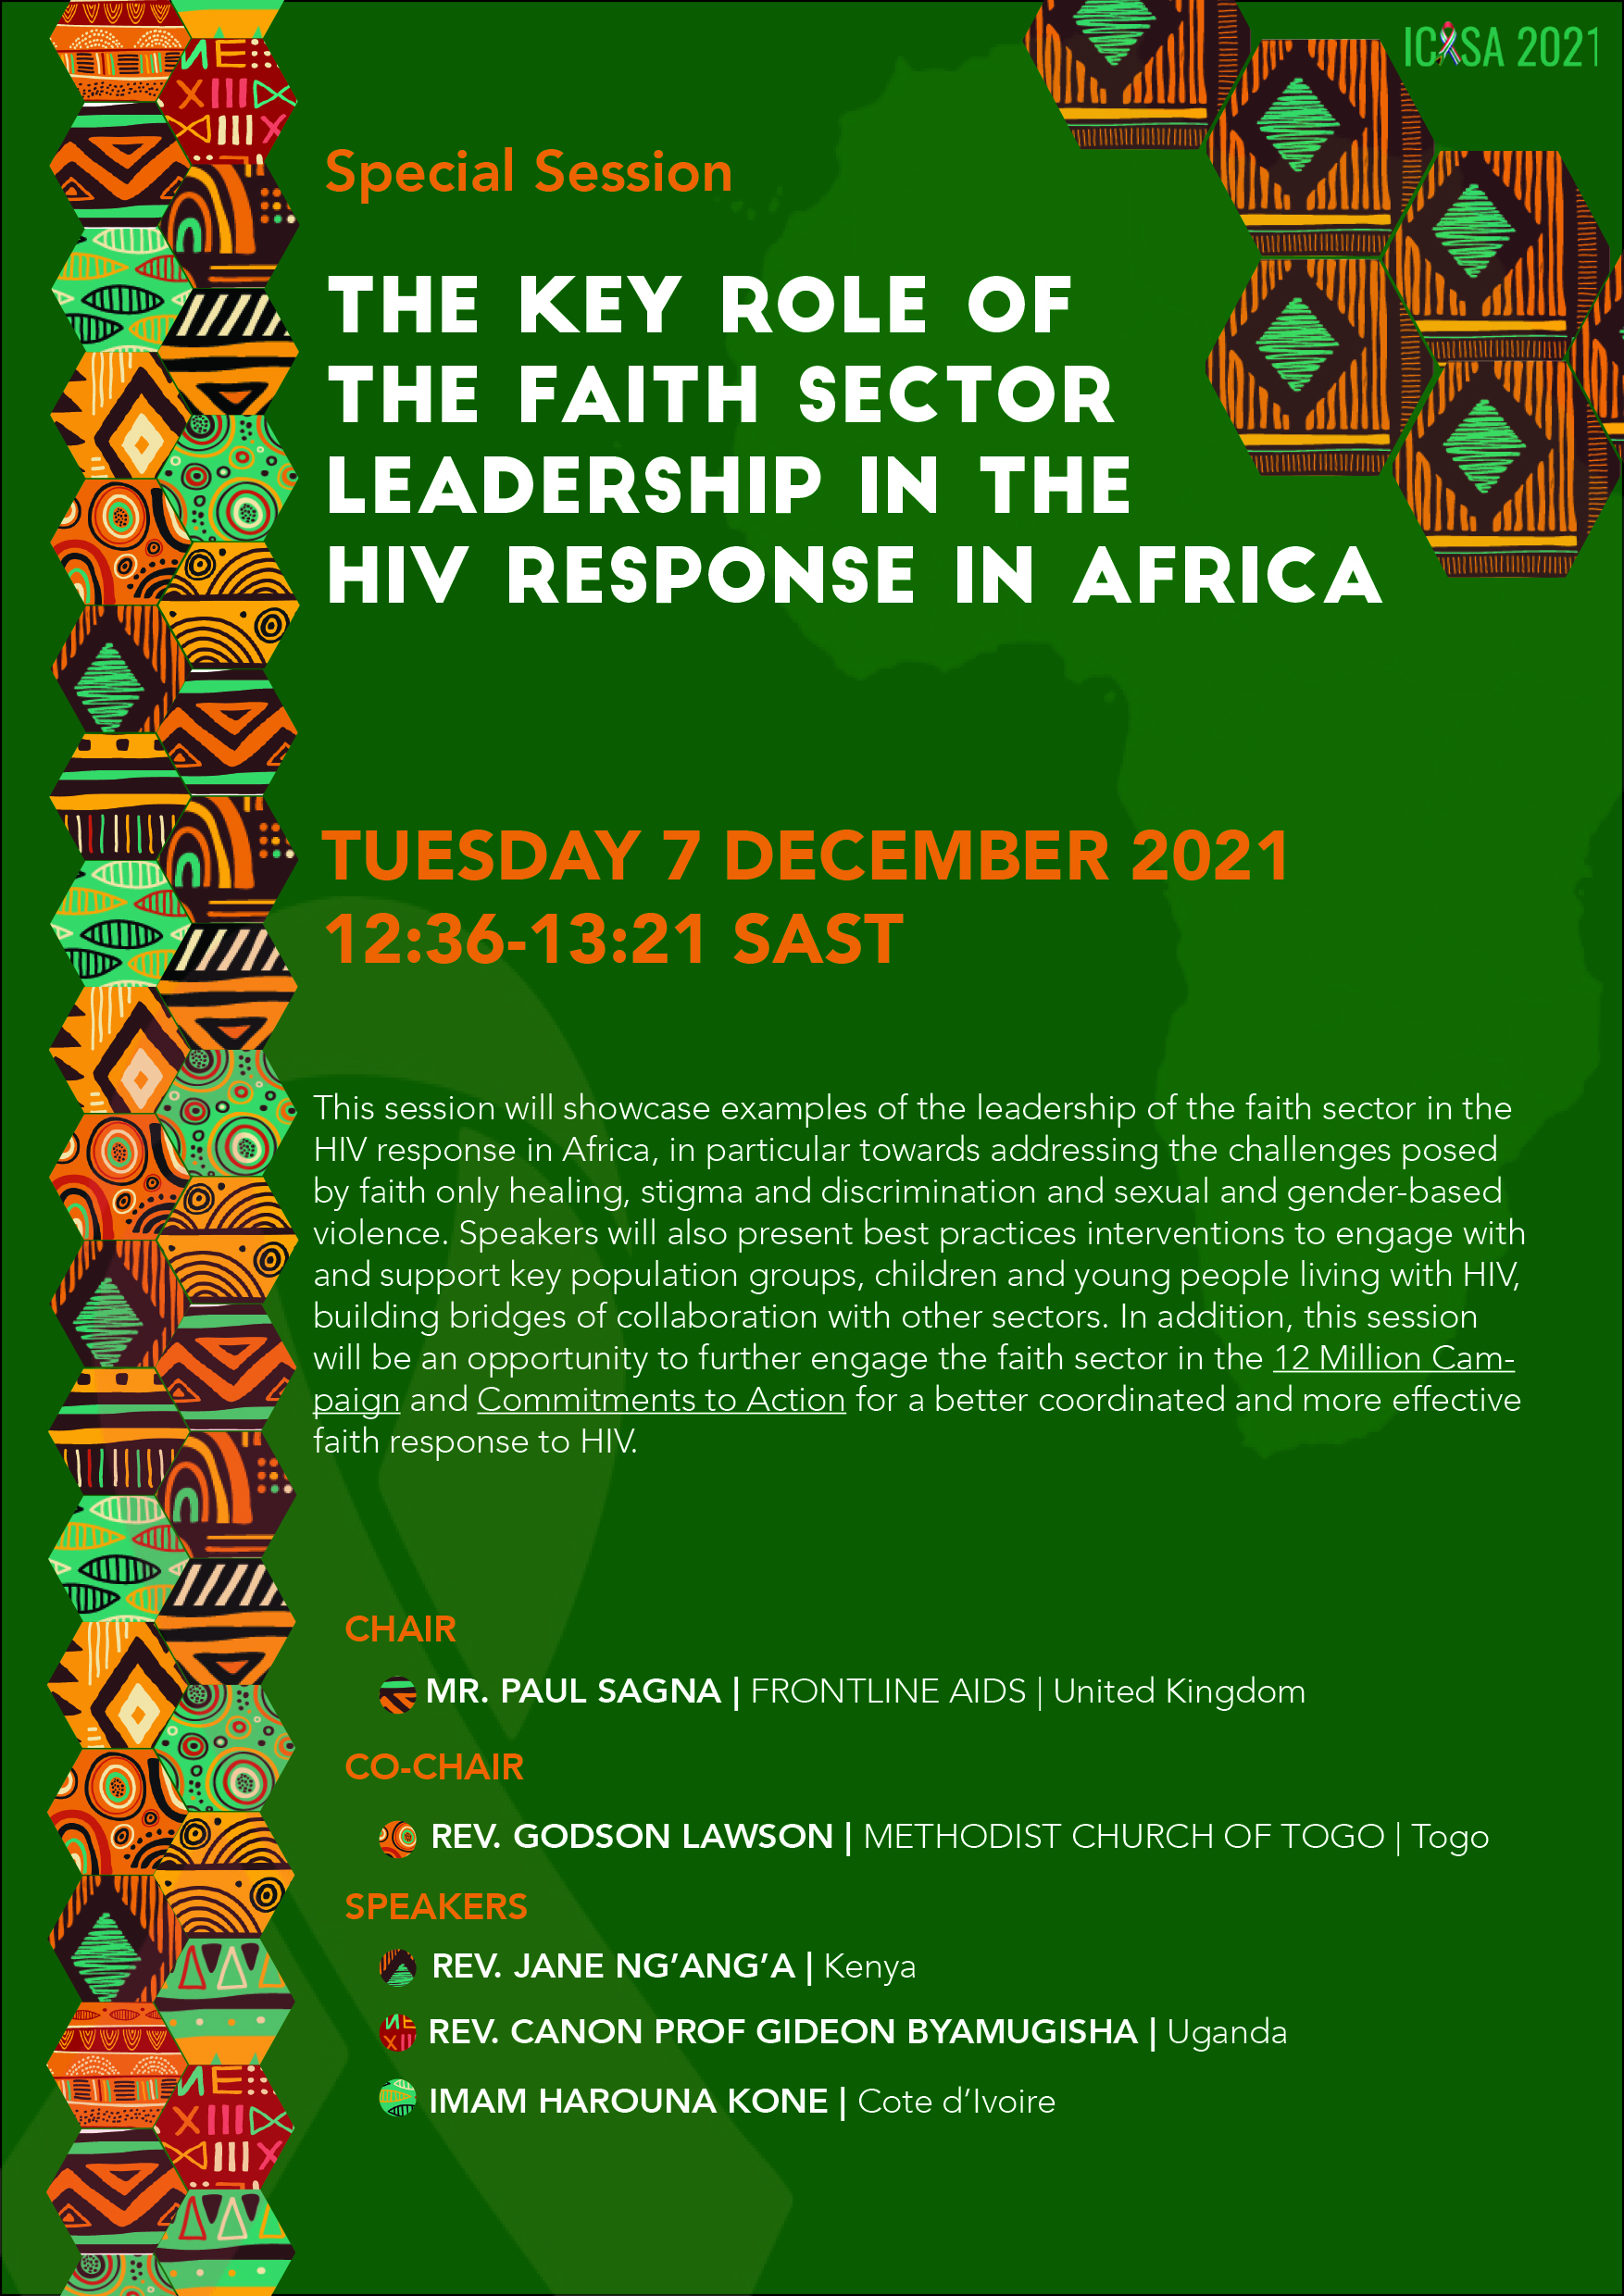 The Key Role of the Faith Sector Leadership in the HIV response in Africa